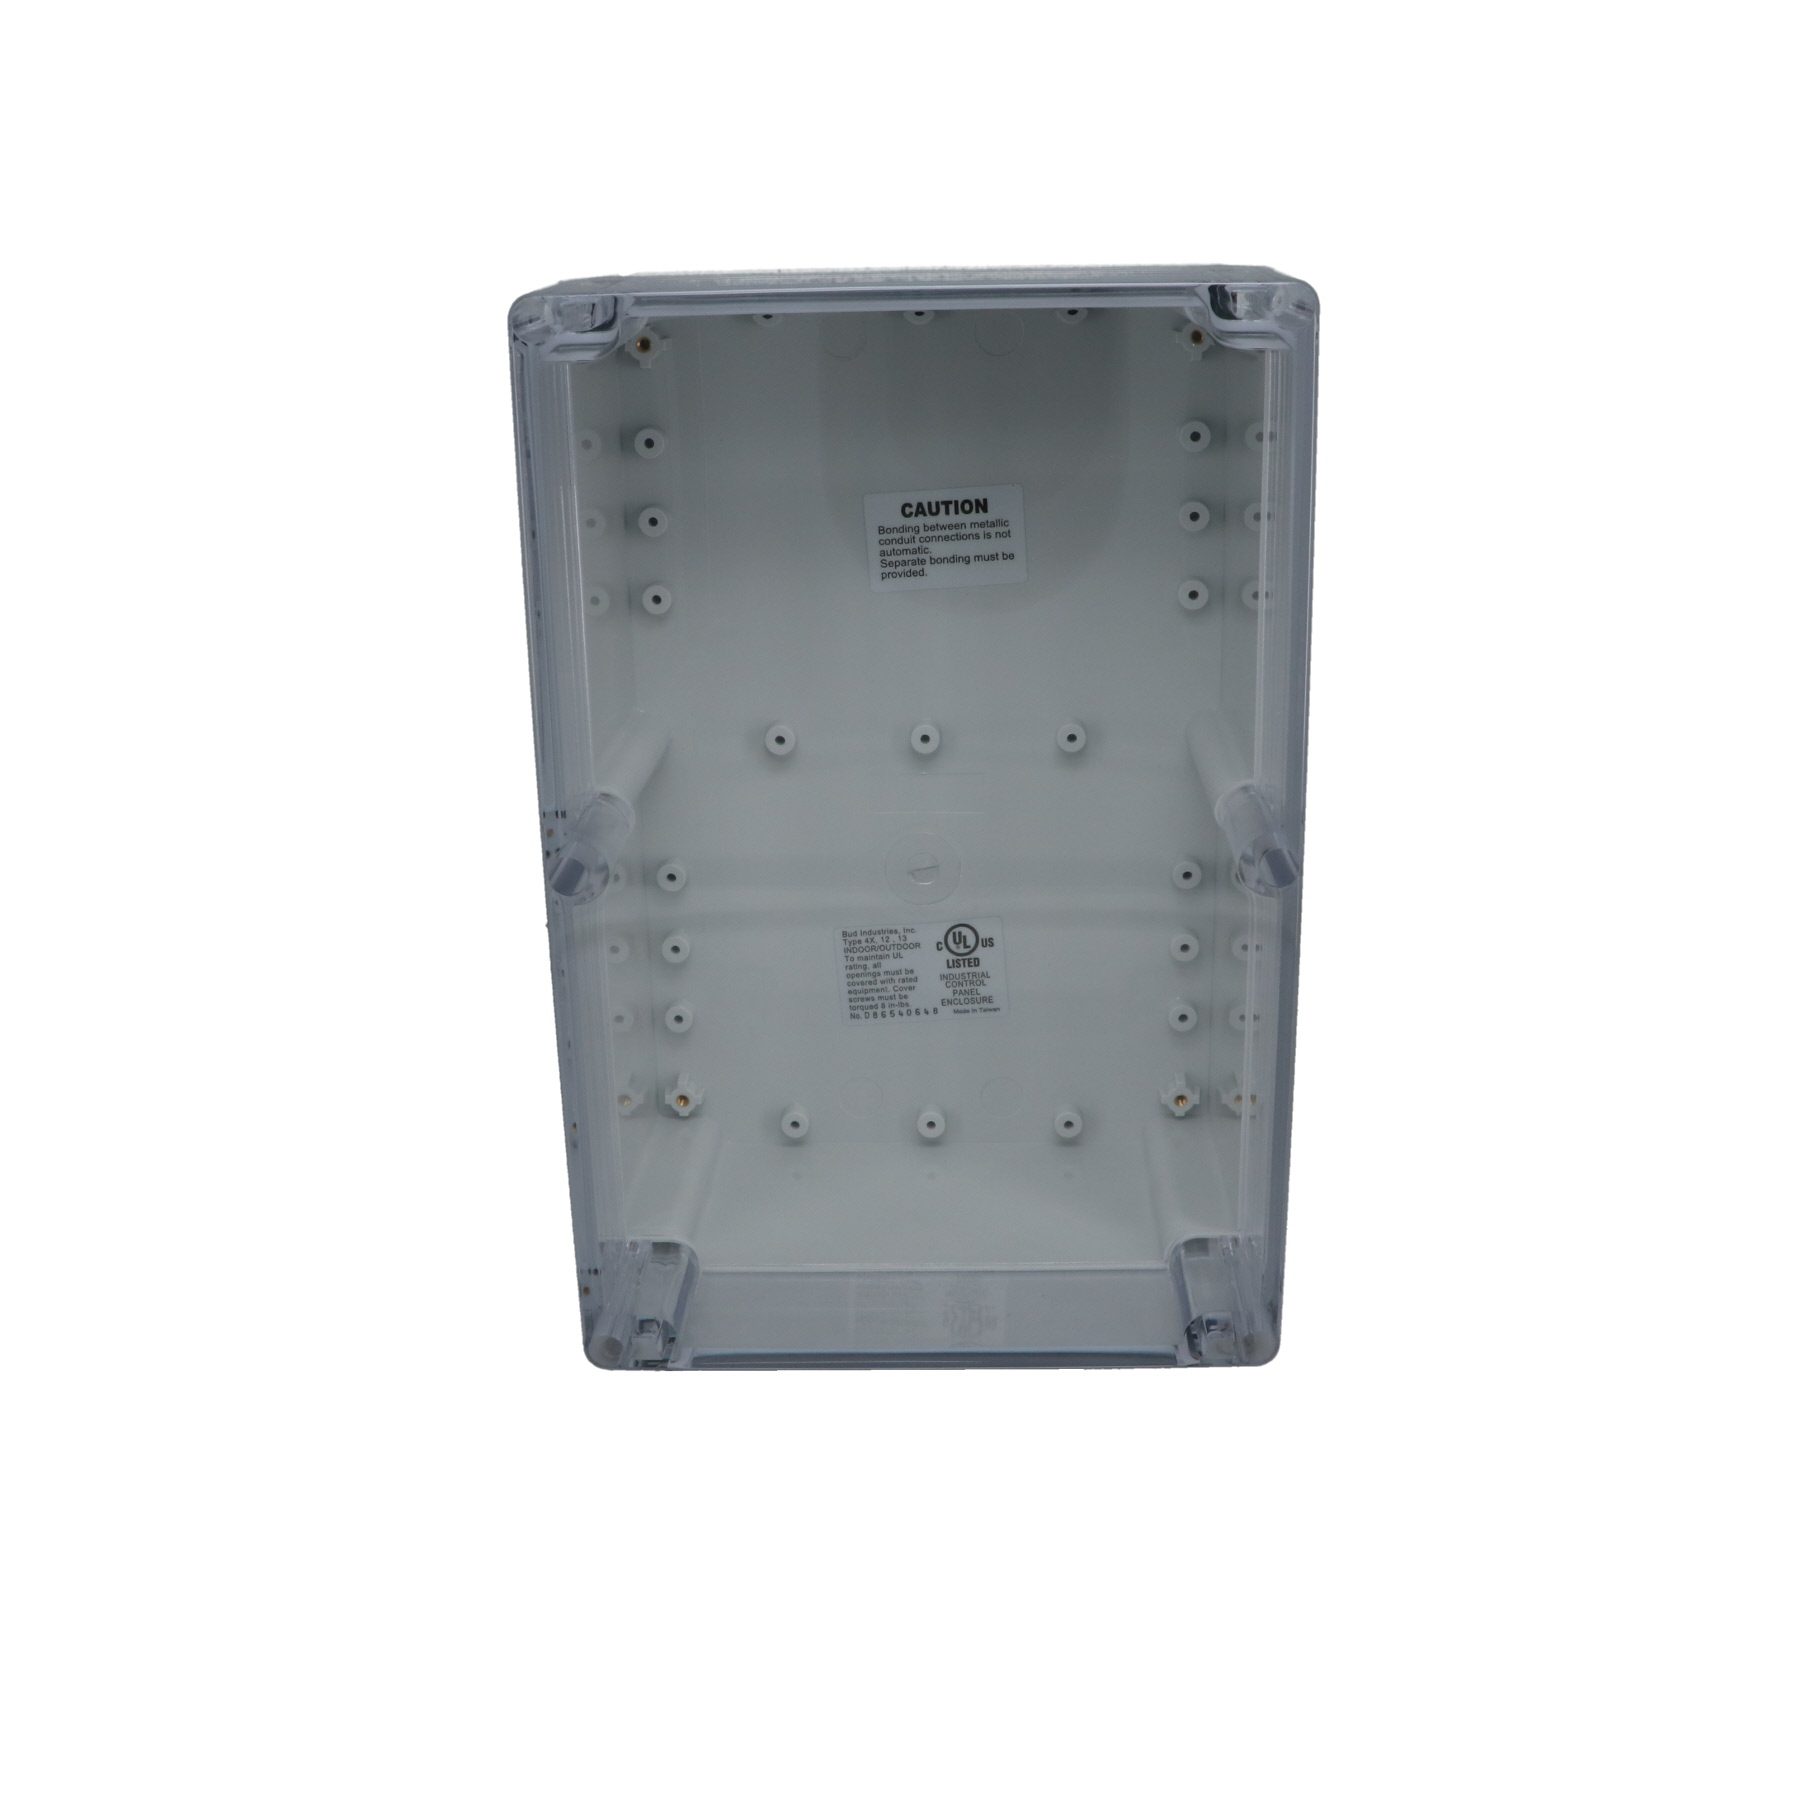 IP65 NEMA 4X Box with Clear Cover PN-1341-C